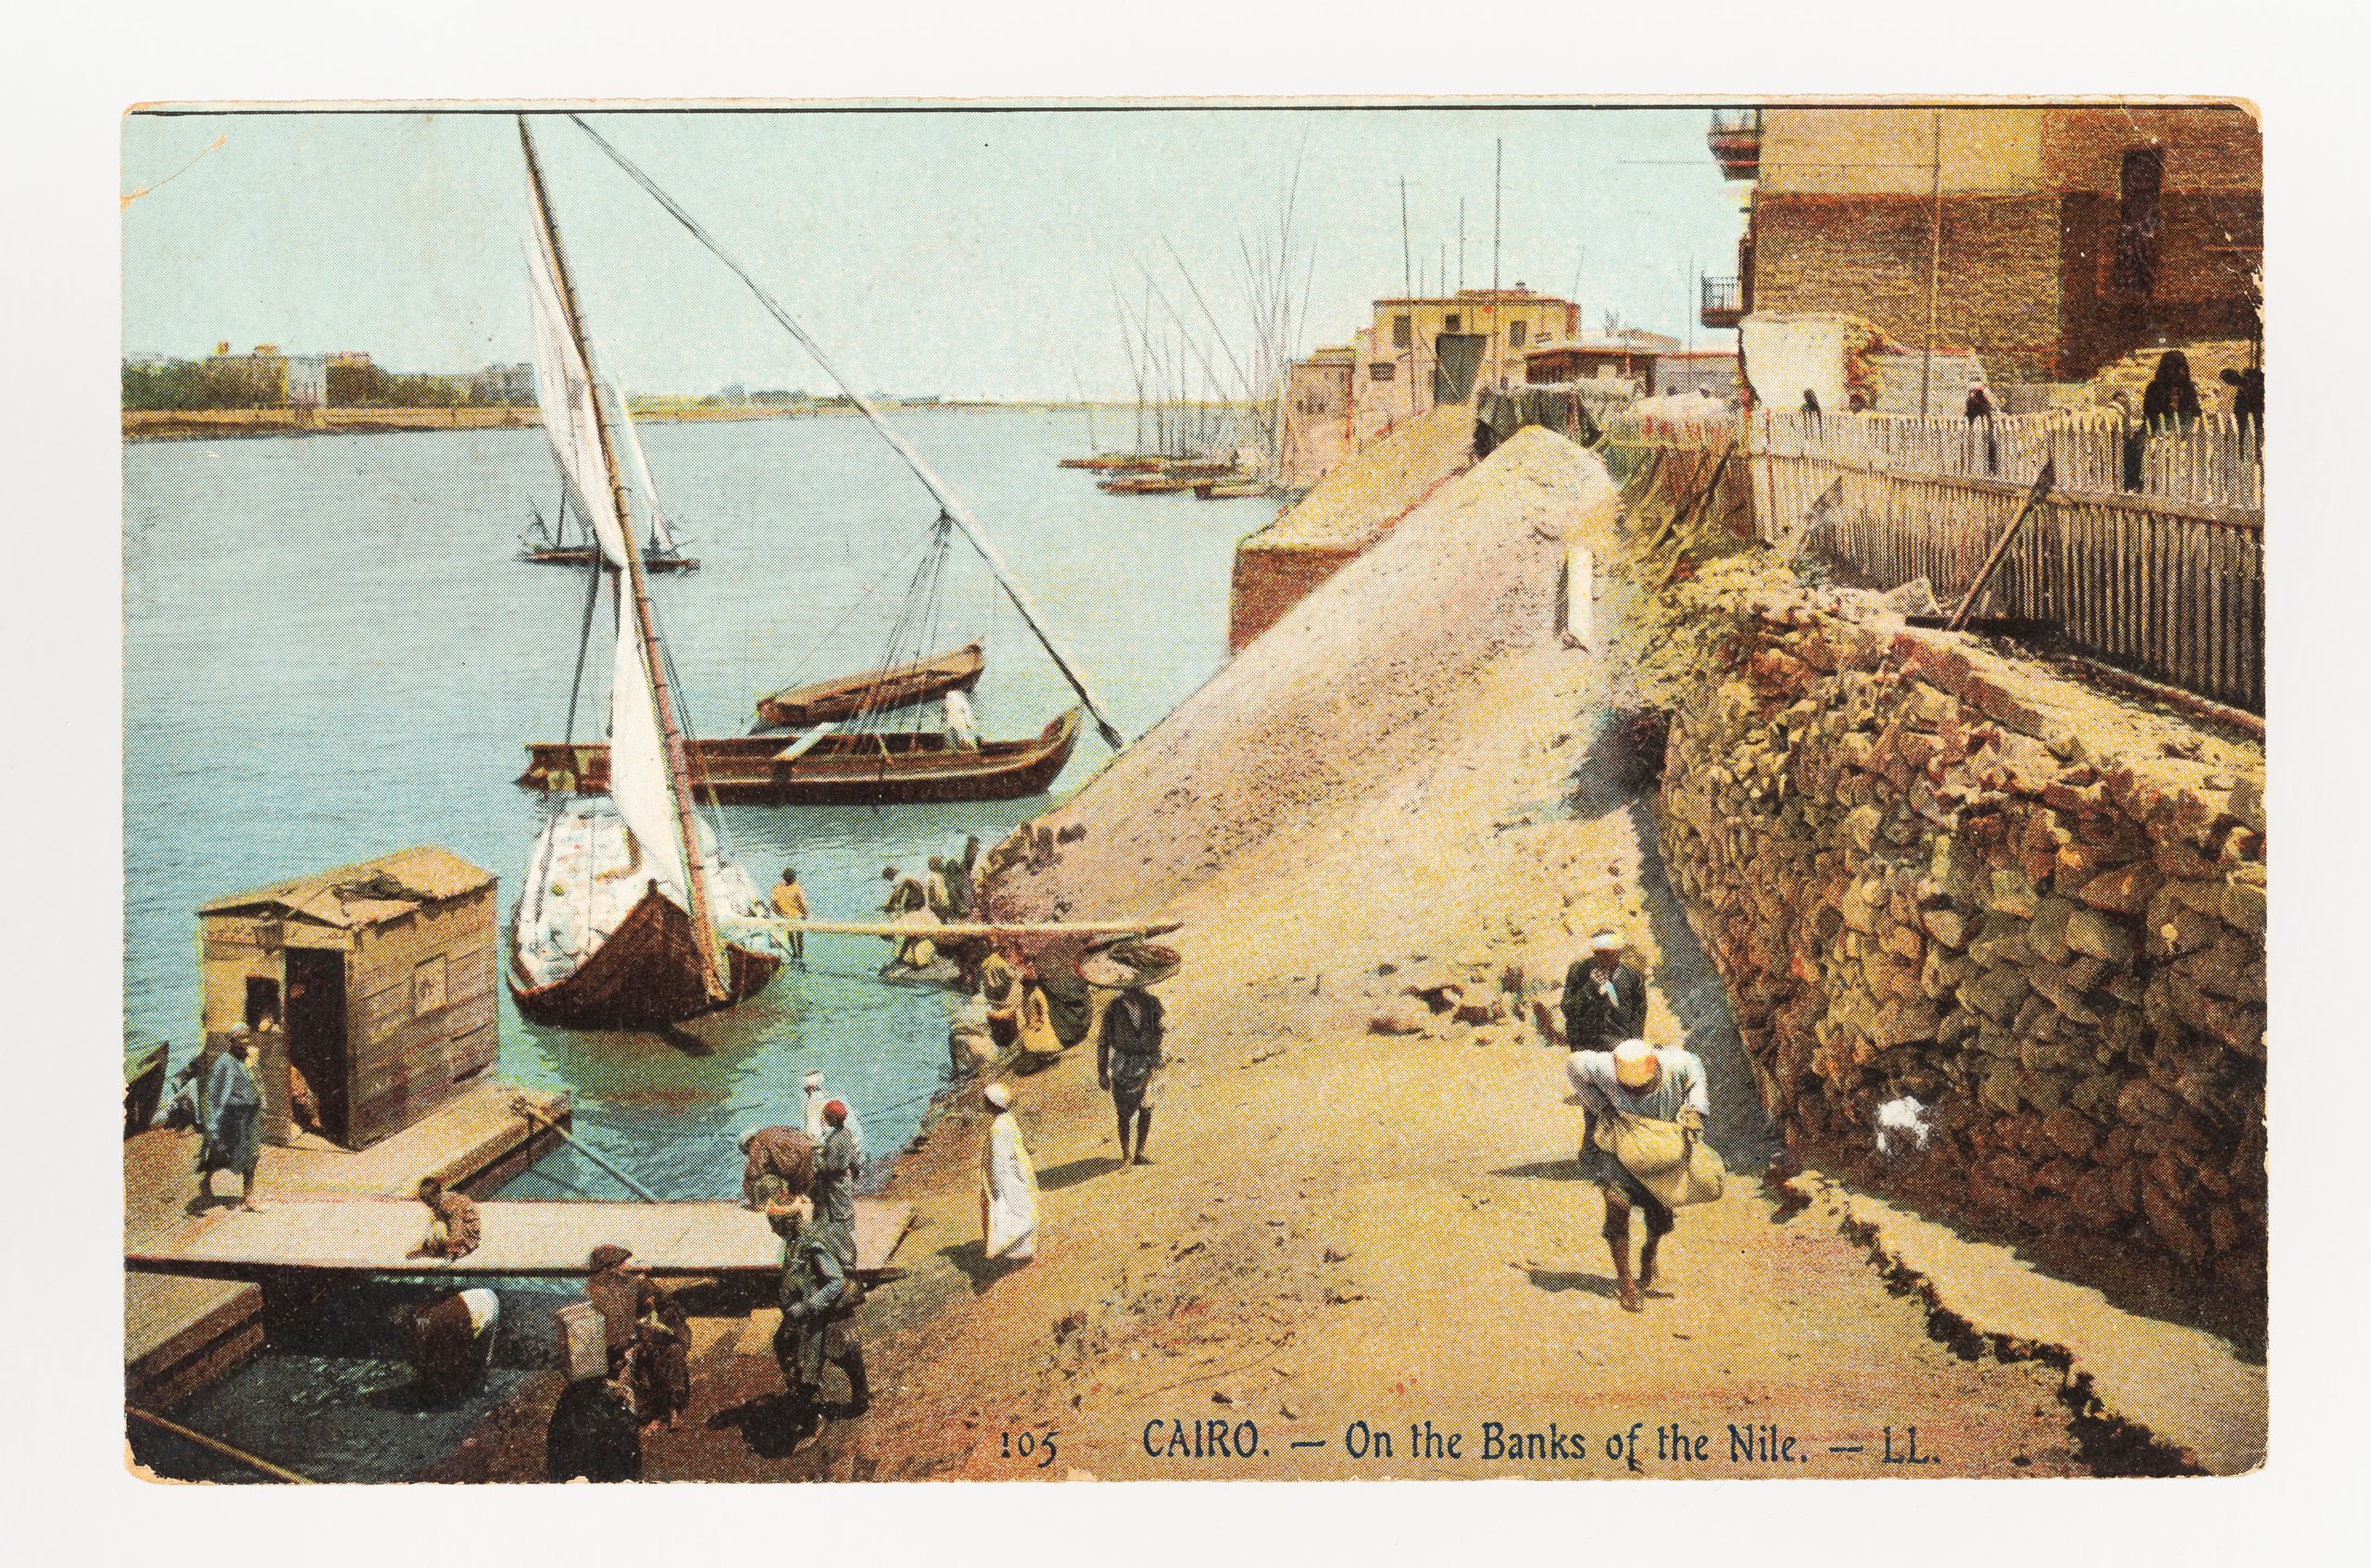 'Cairo - On the banks of the Nile' postcard used by Frederick Boddington